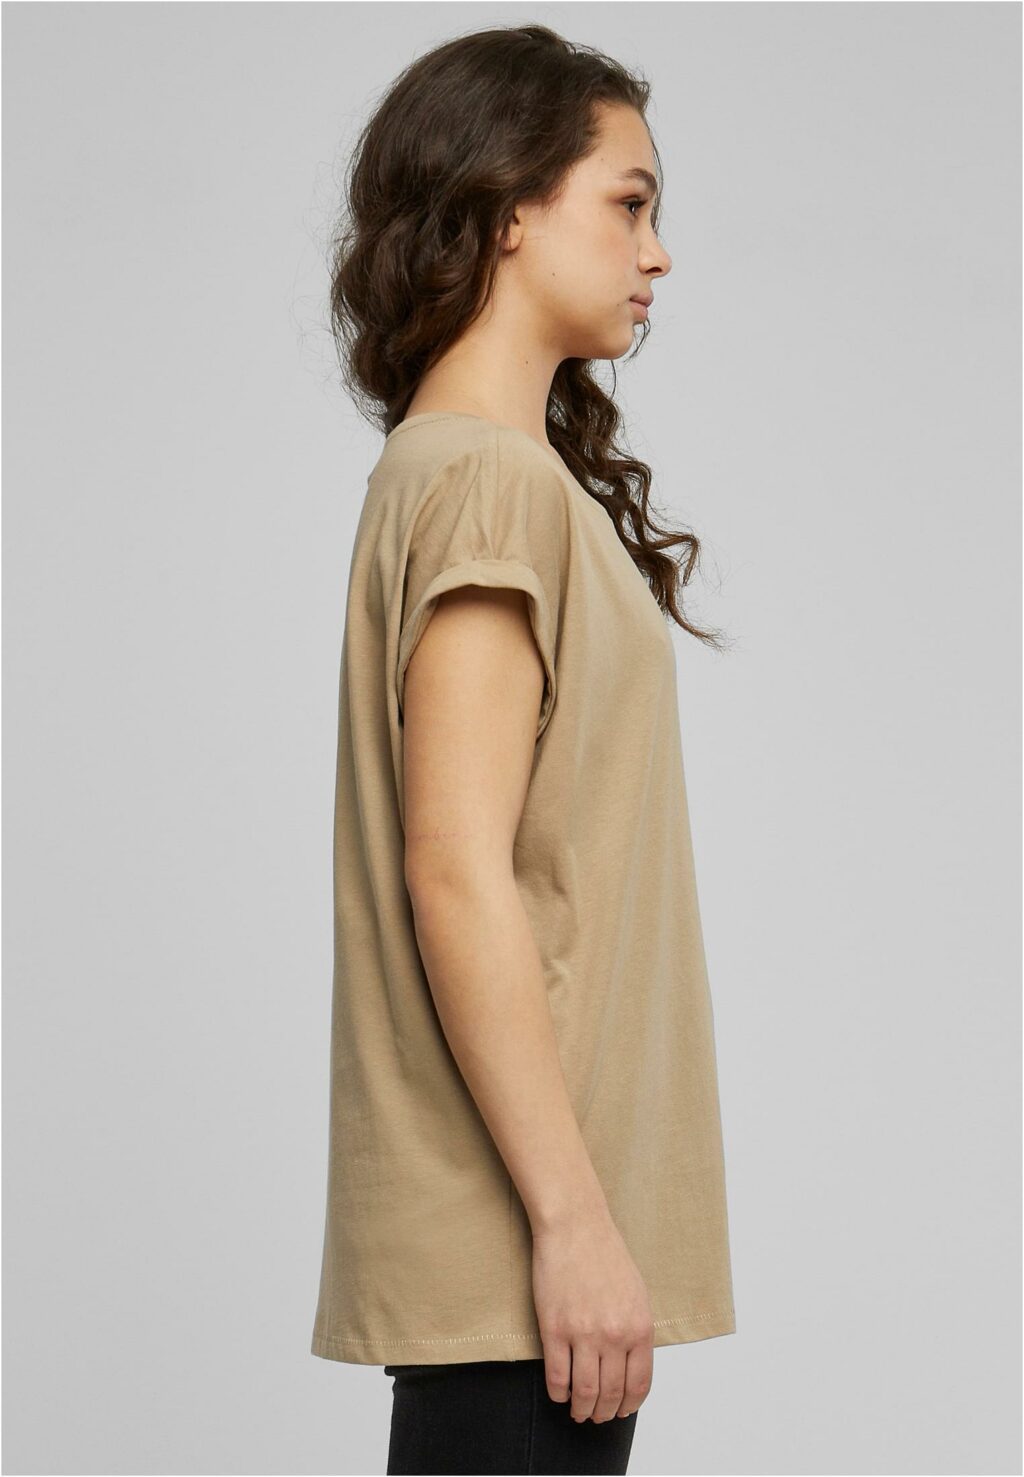 Urban Classics Ladies Extended Shoulder Tee softtaupe TB771